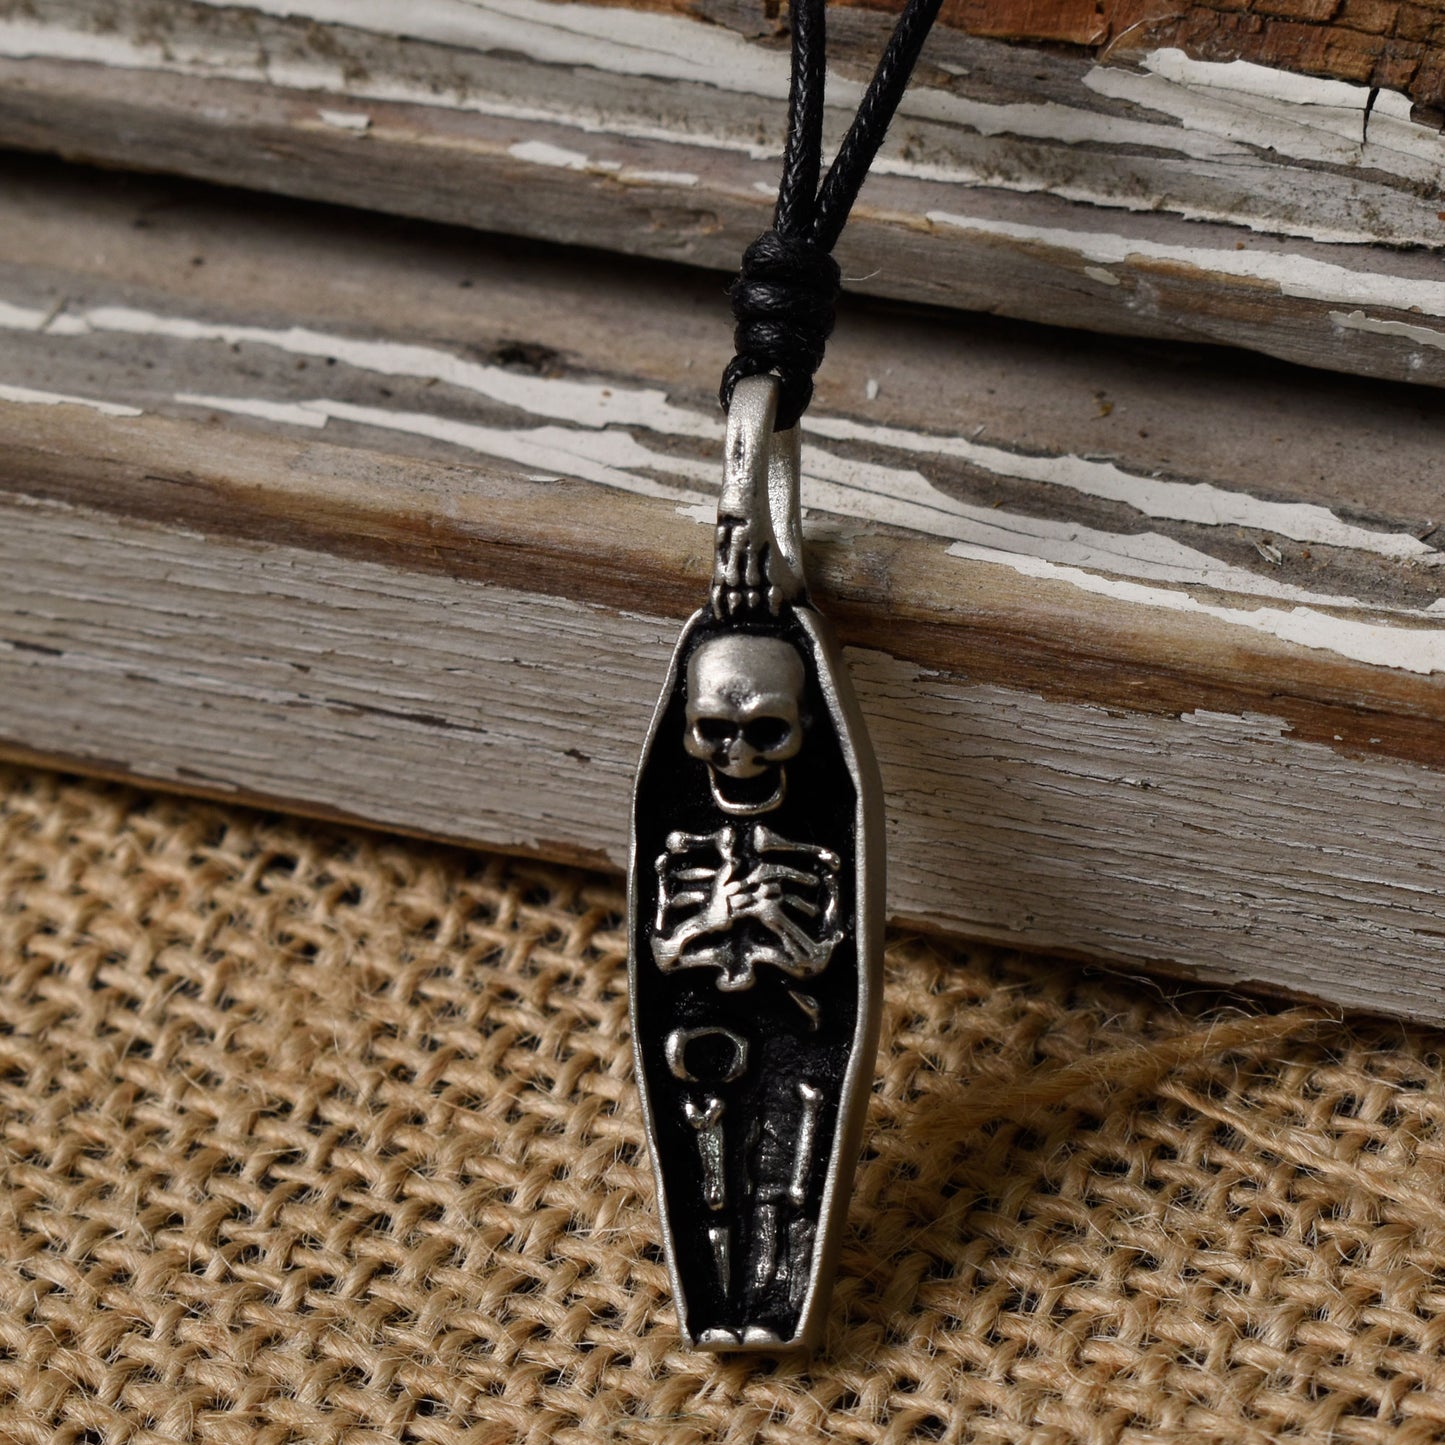 Skeleton Skull Coffin Silver Pewter Charm Necklace Pendant Jewelry